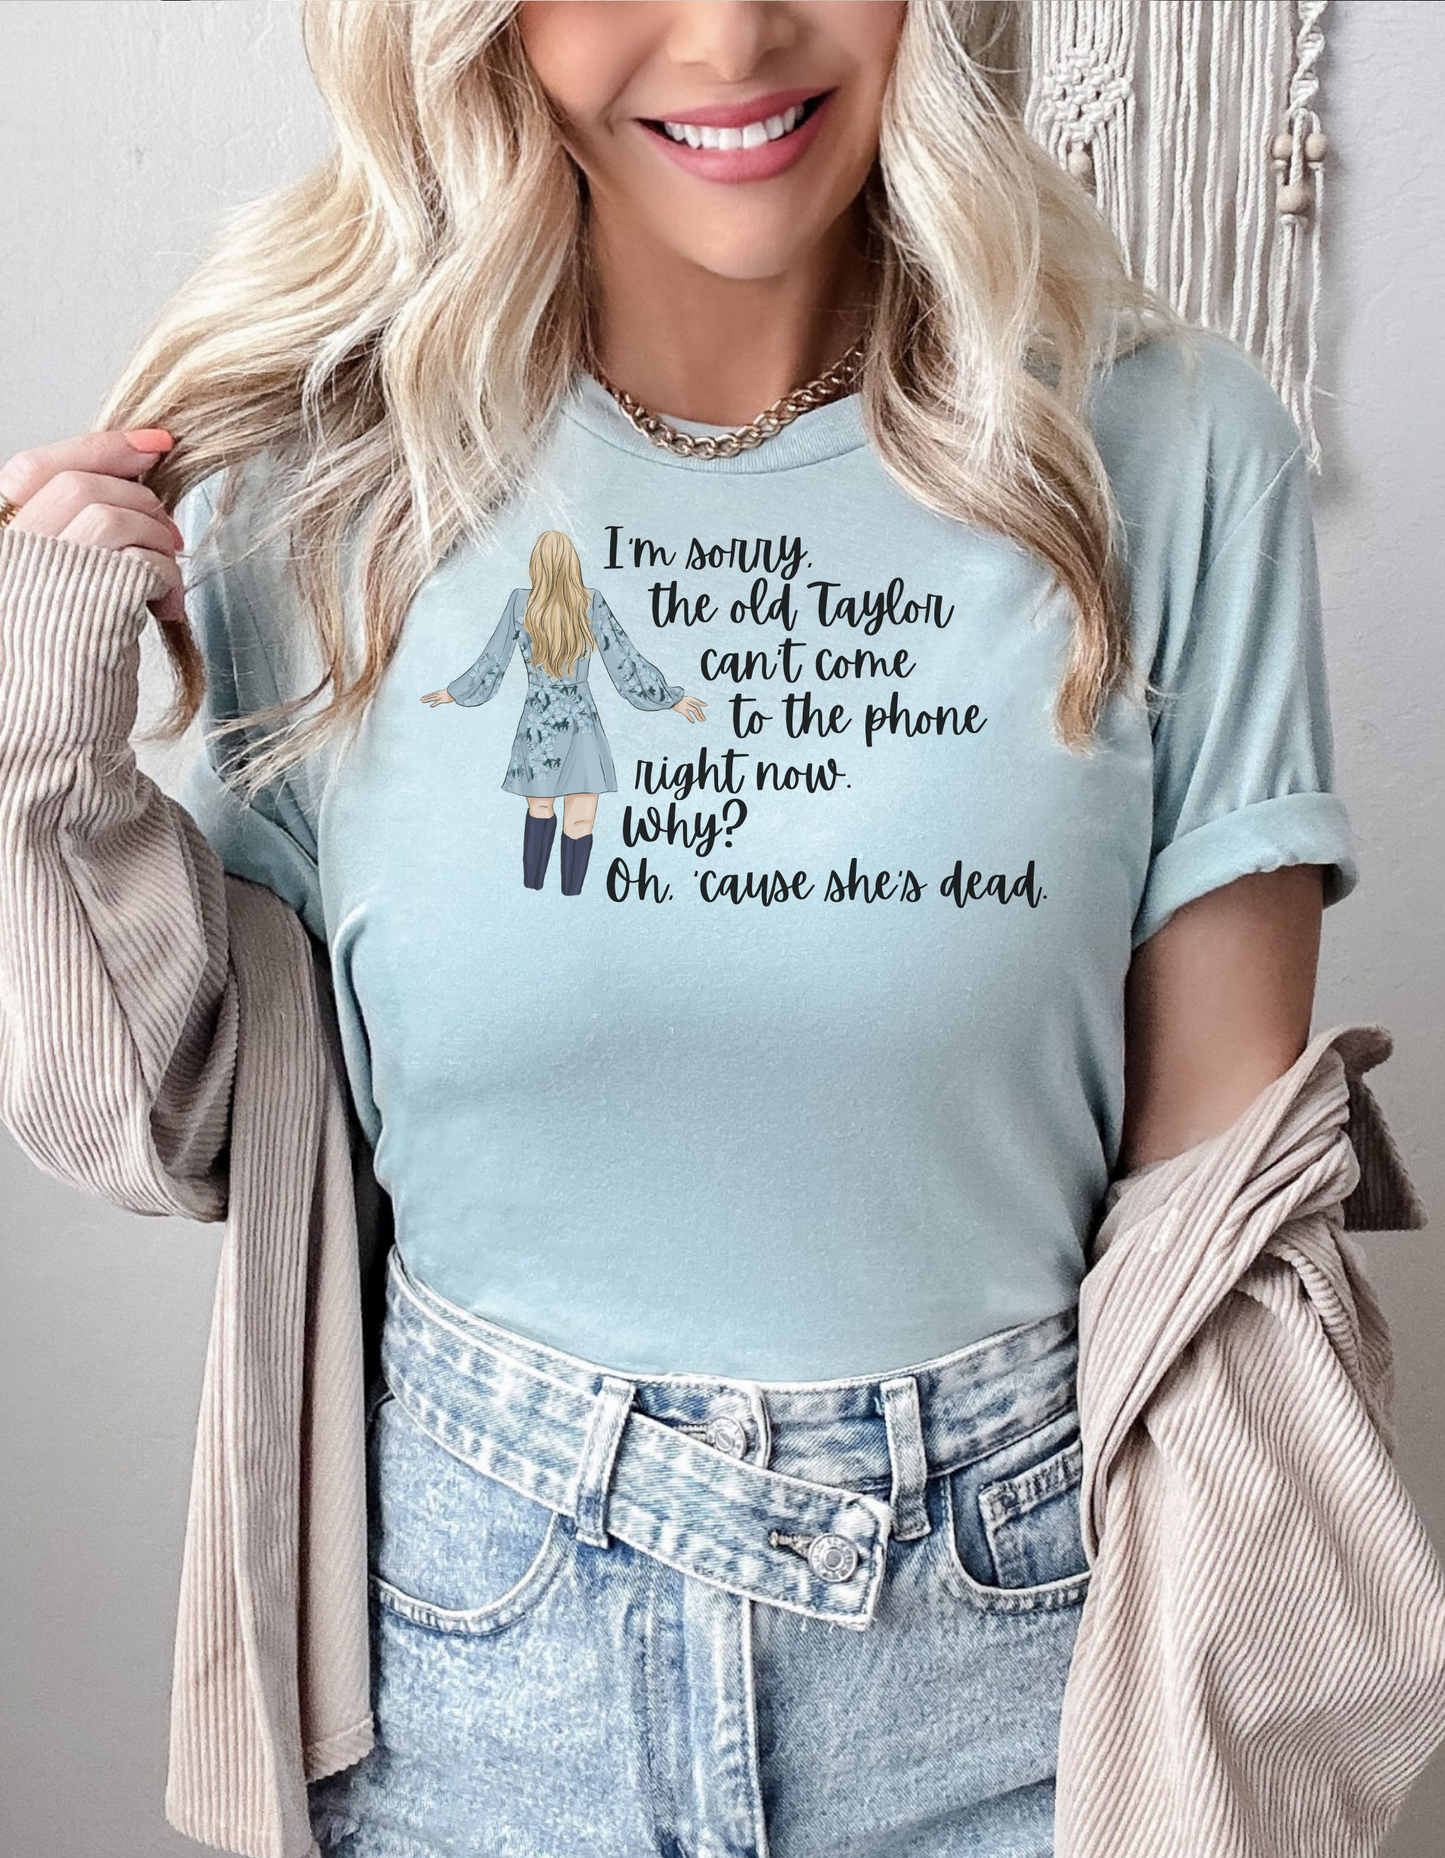 Taylor Swift Preppy Picture T-Shirt - I'm Sorry, The Old Taylor Can't Come To The Phone